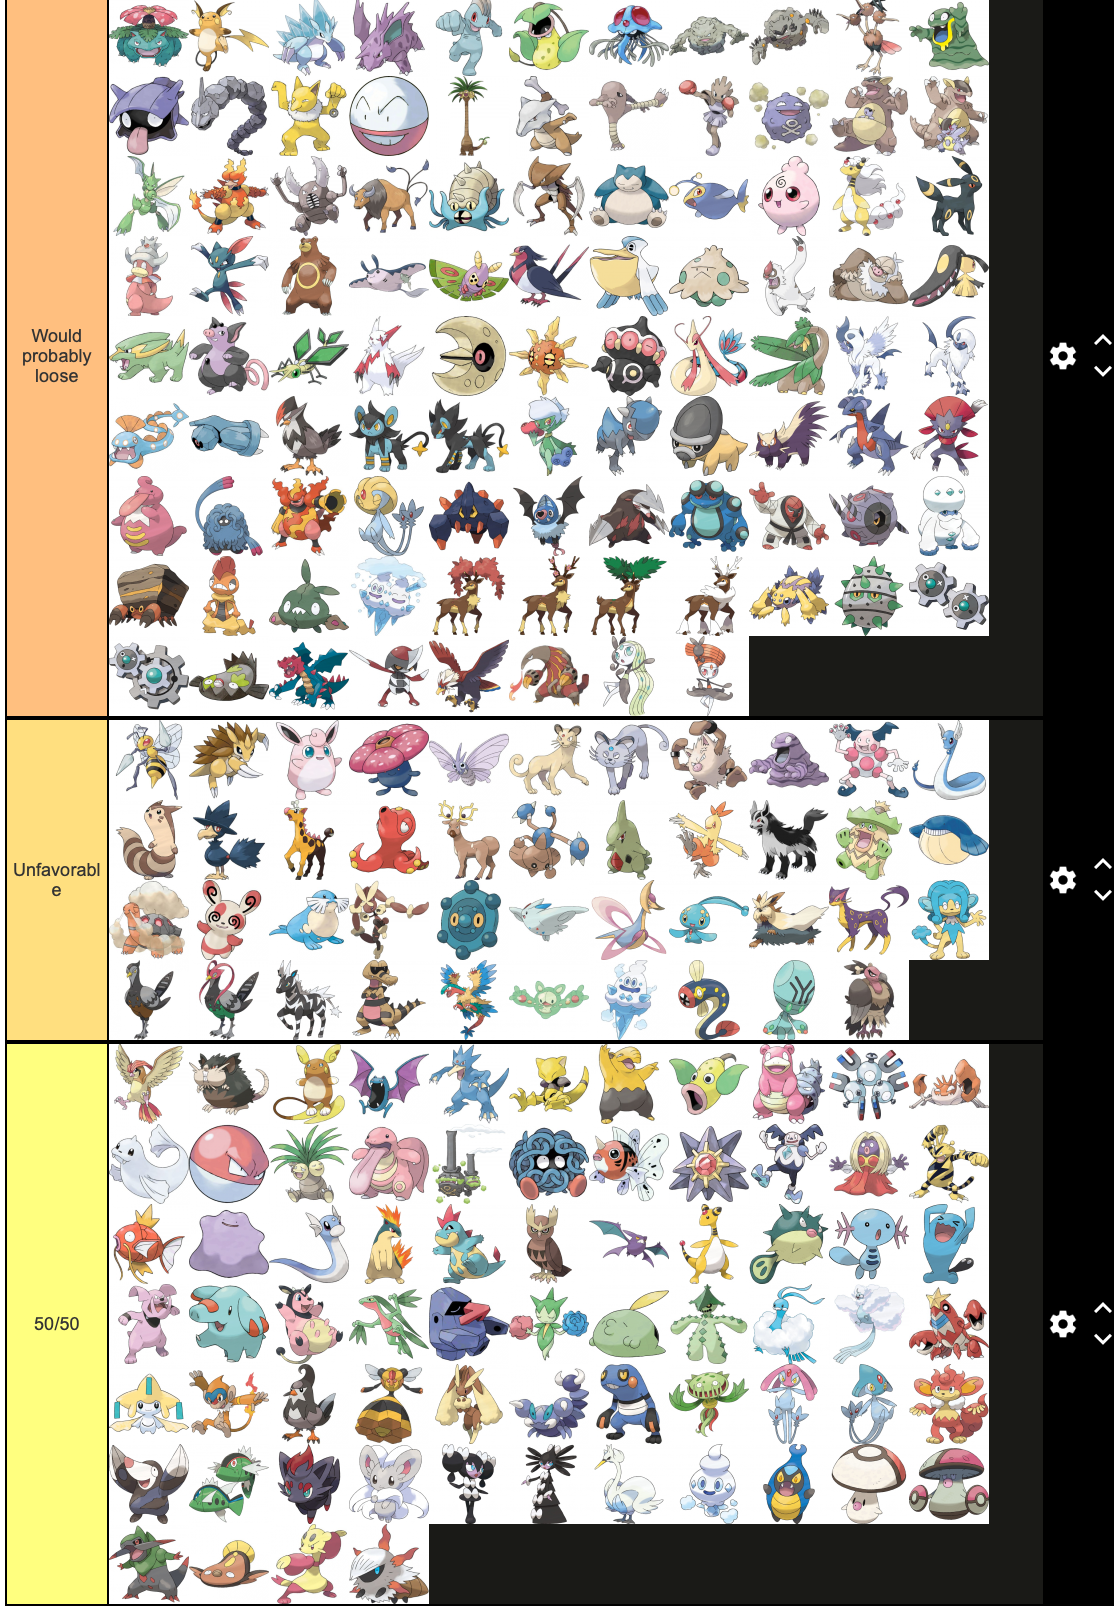 Ranking every Pokemon based on easily a person could beat them in a fight [UPDATED GEN 5 MONS] | Smogon Forums